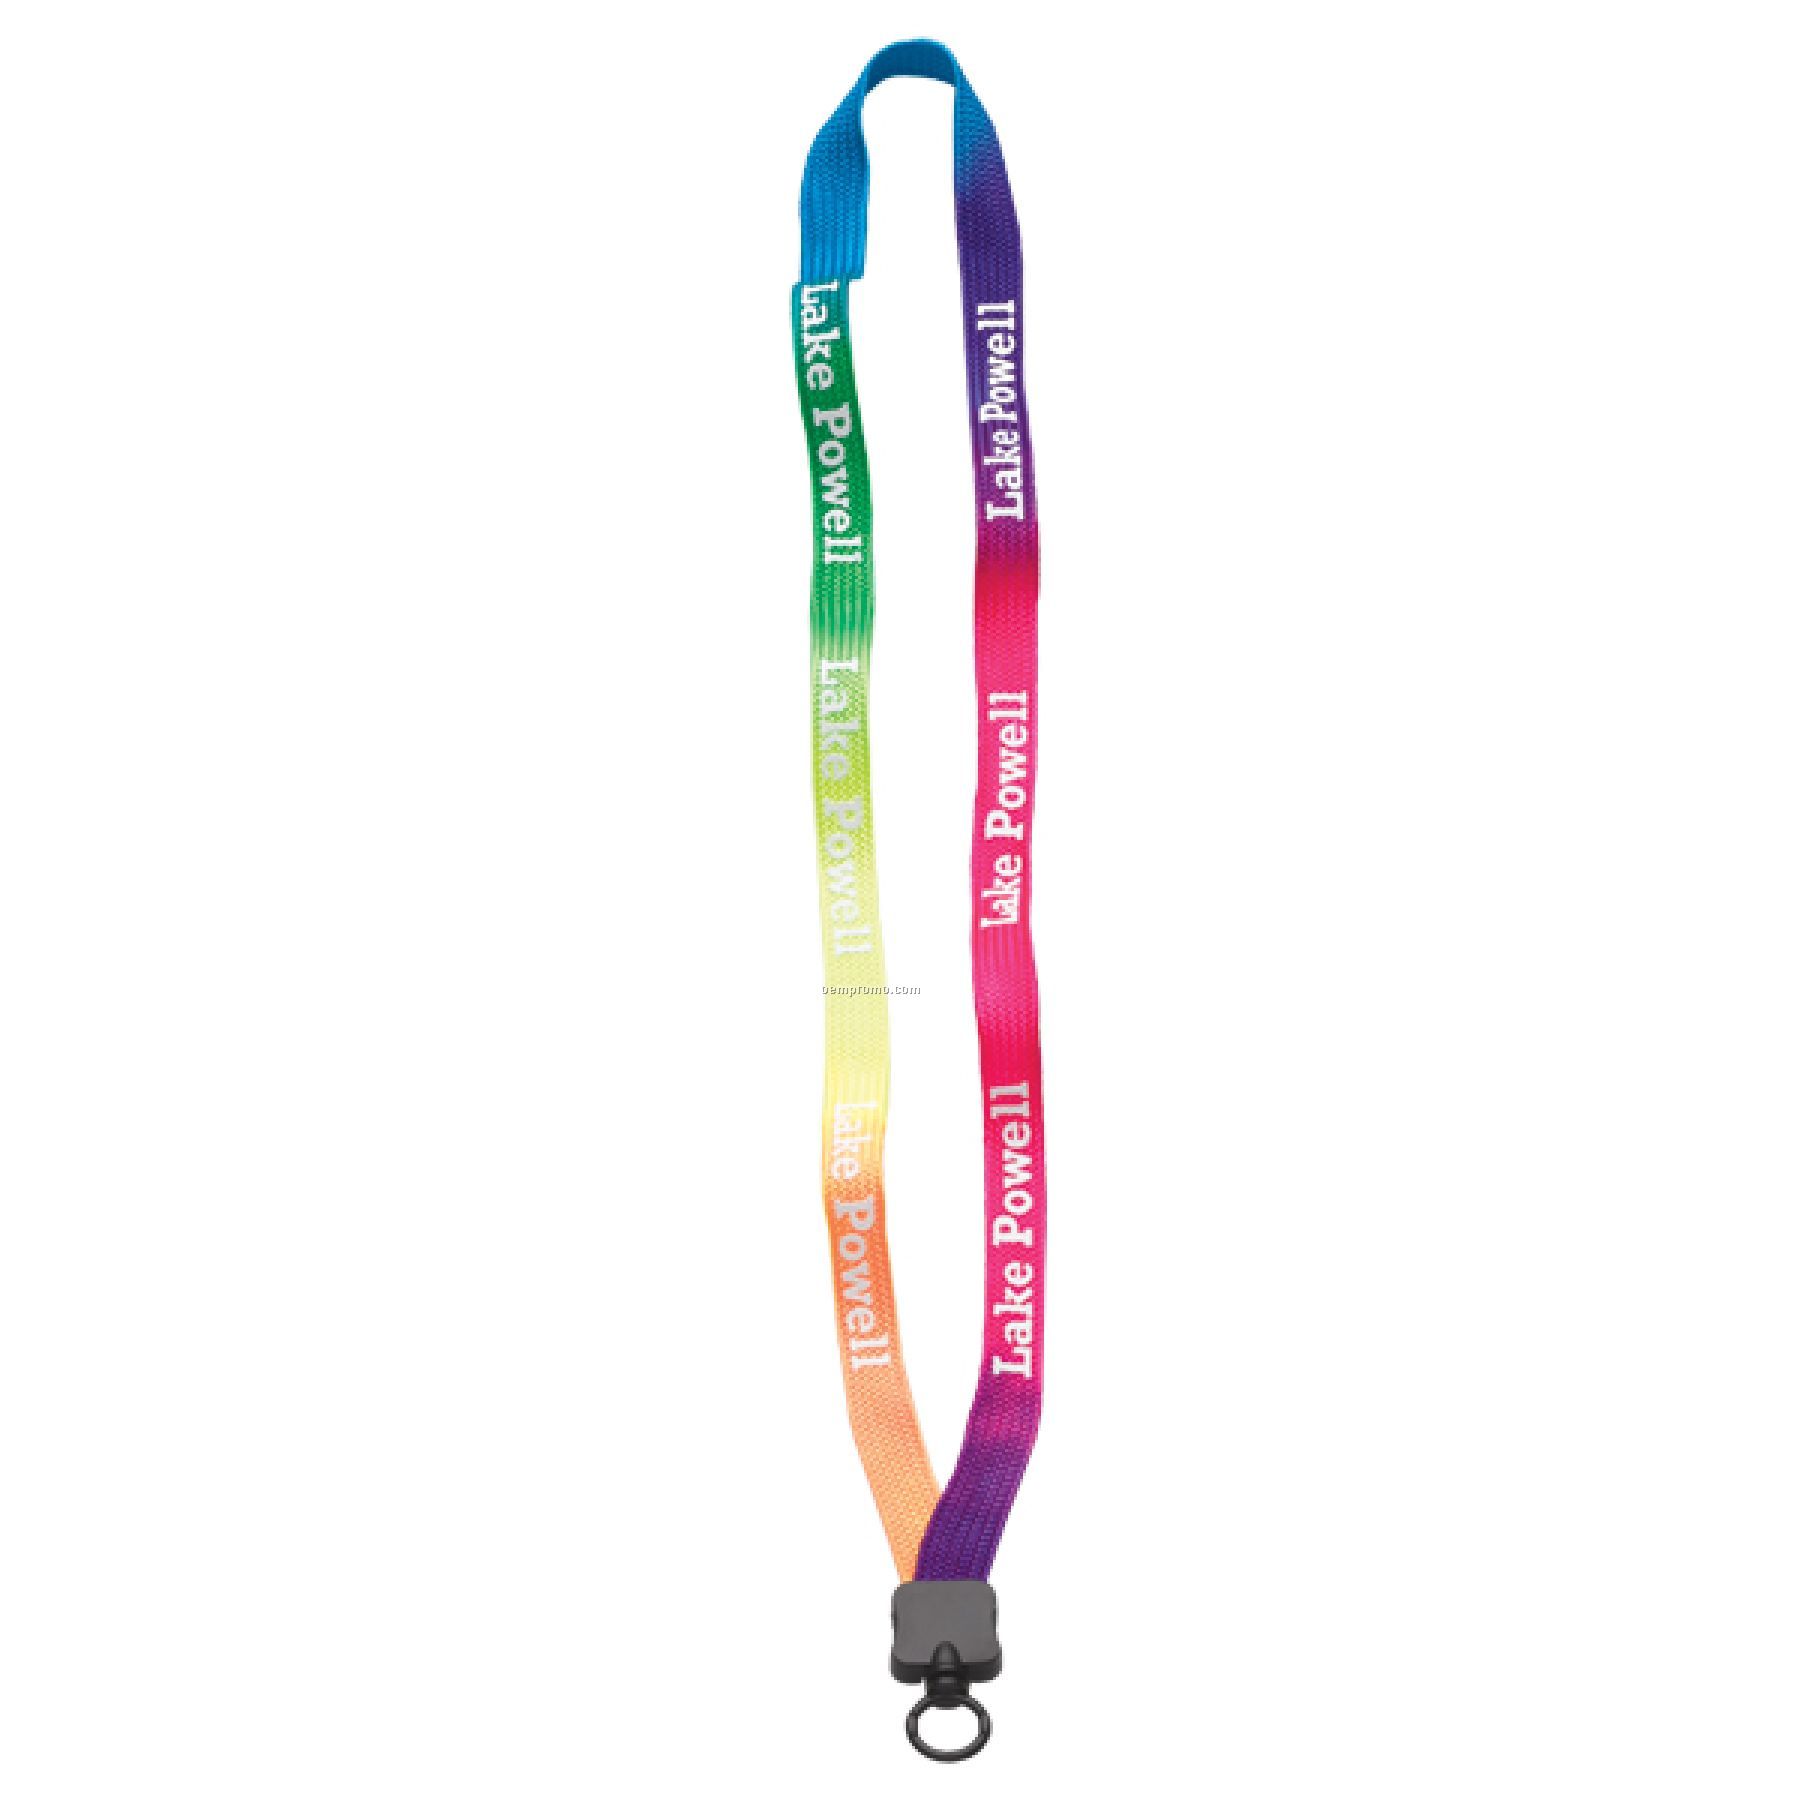 1/2" Tie Dye Lanyard With Plastic Clamshell & O-ring